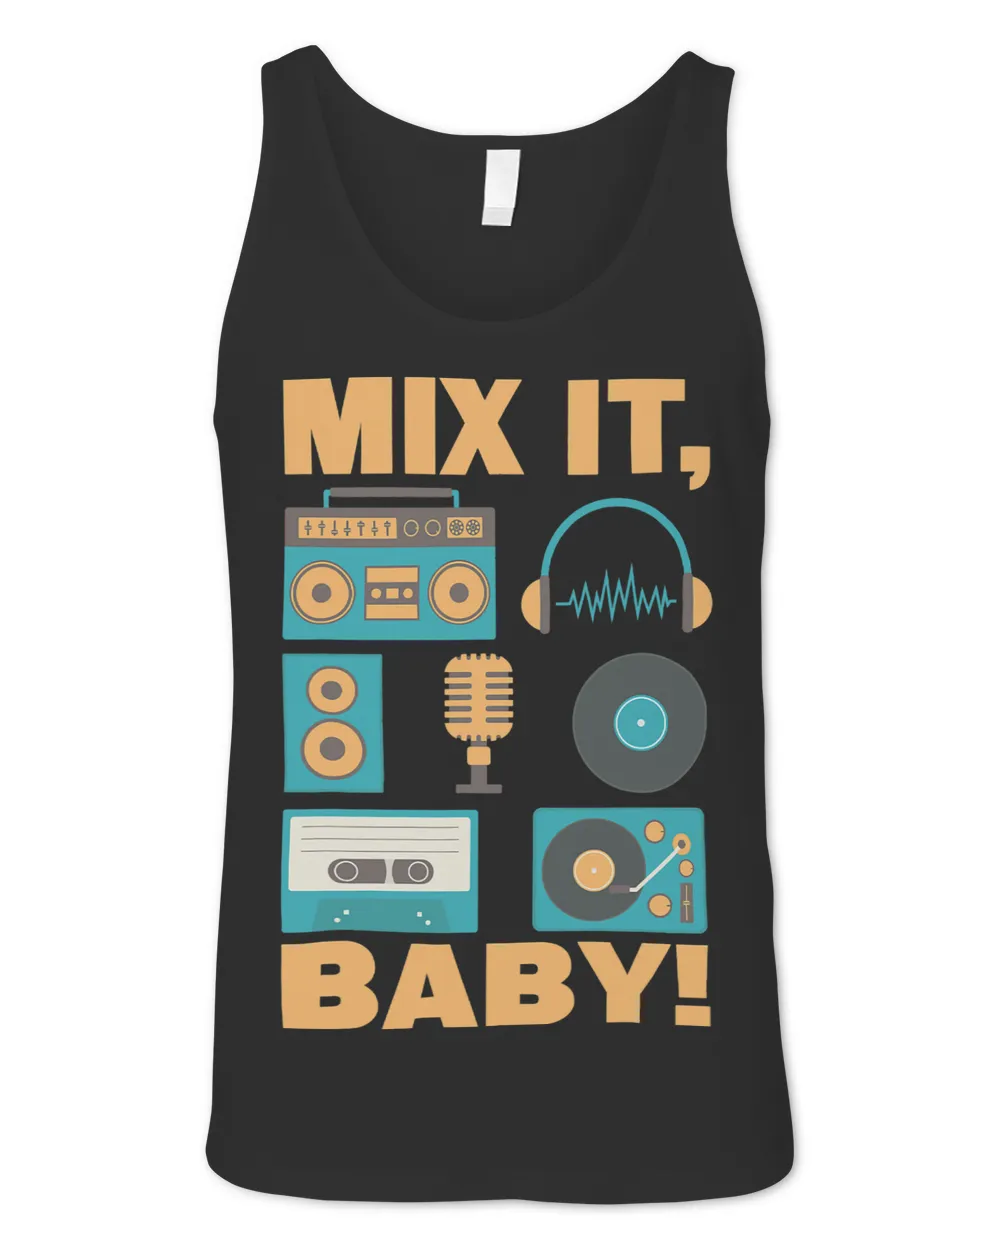 Mix Baby For Dj